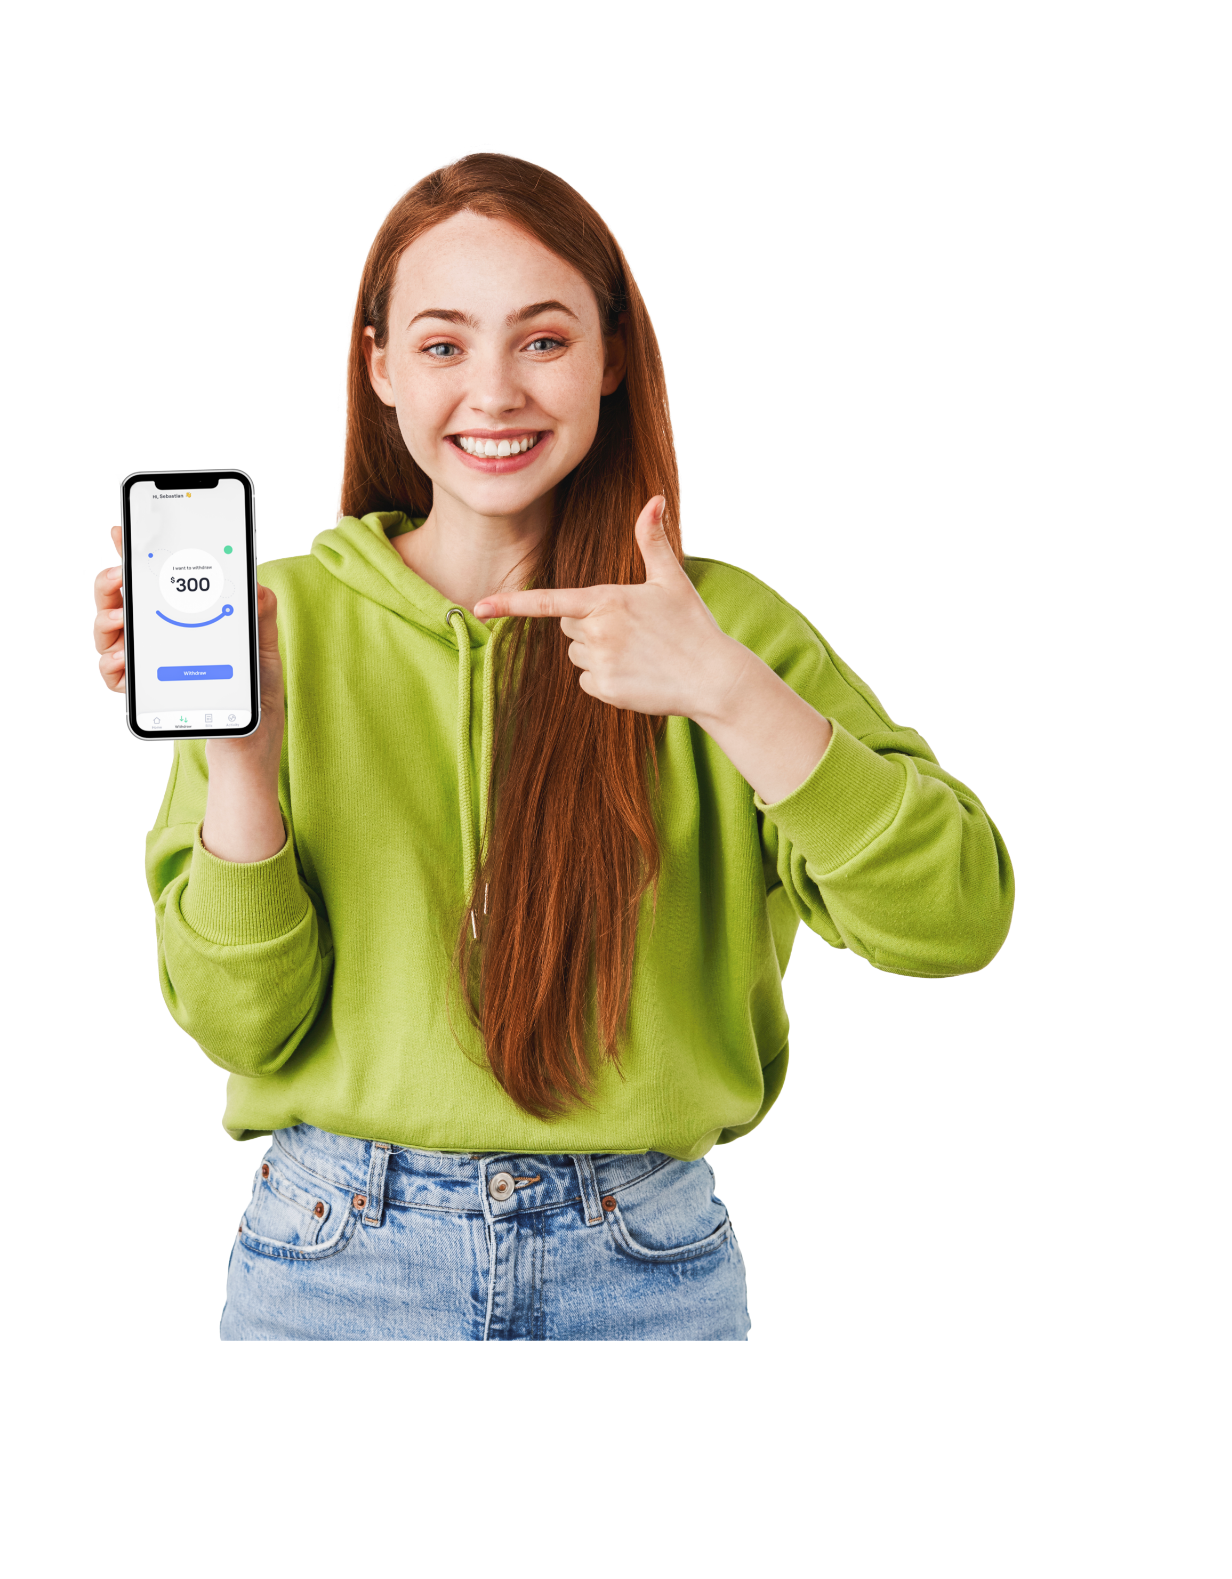 Enthusiastic woman thumbs up with app